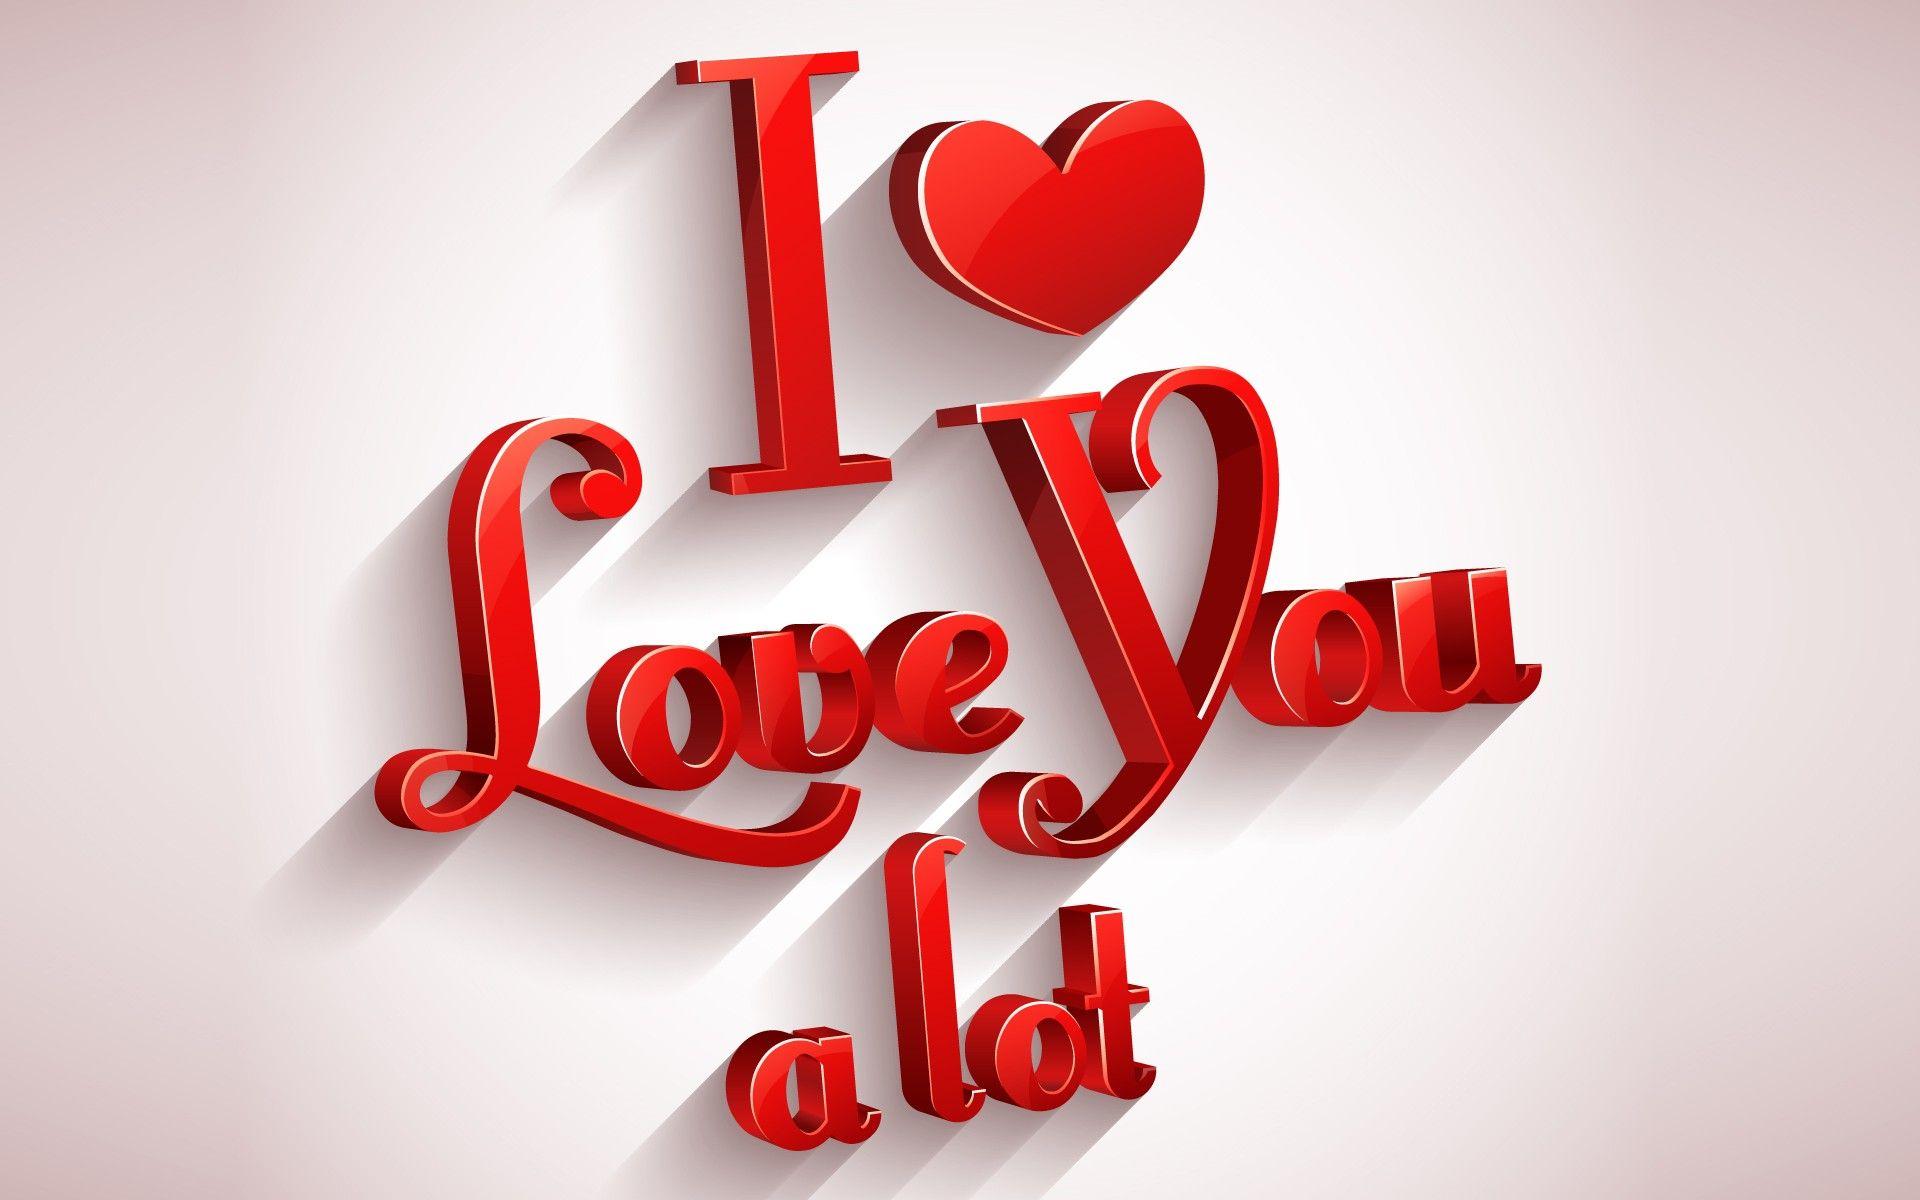 Top New Wallpaper I Love You Hq Download Wallpapers Book Your 1 Source For Free Download Hd 4k High Quality Wallpapers